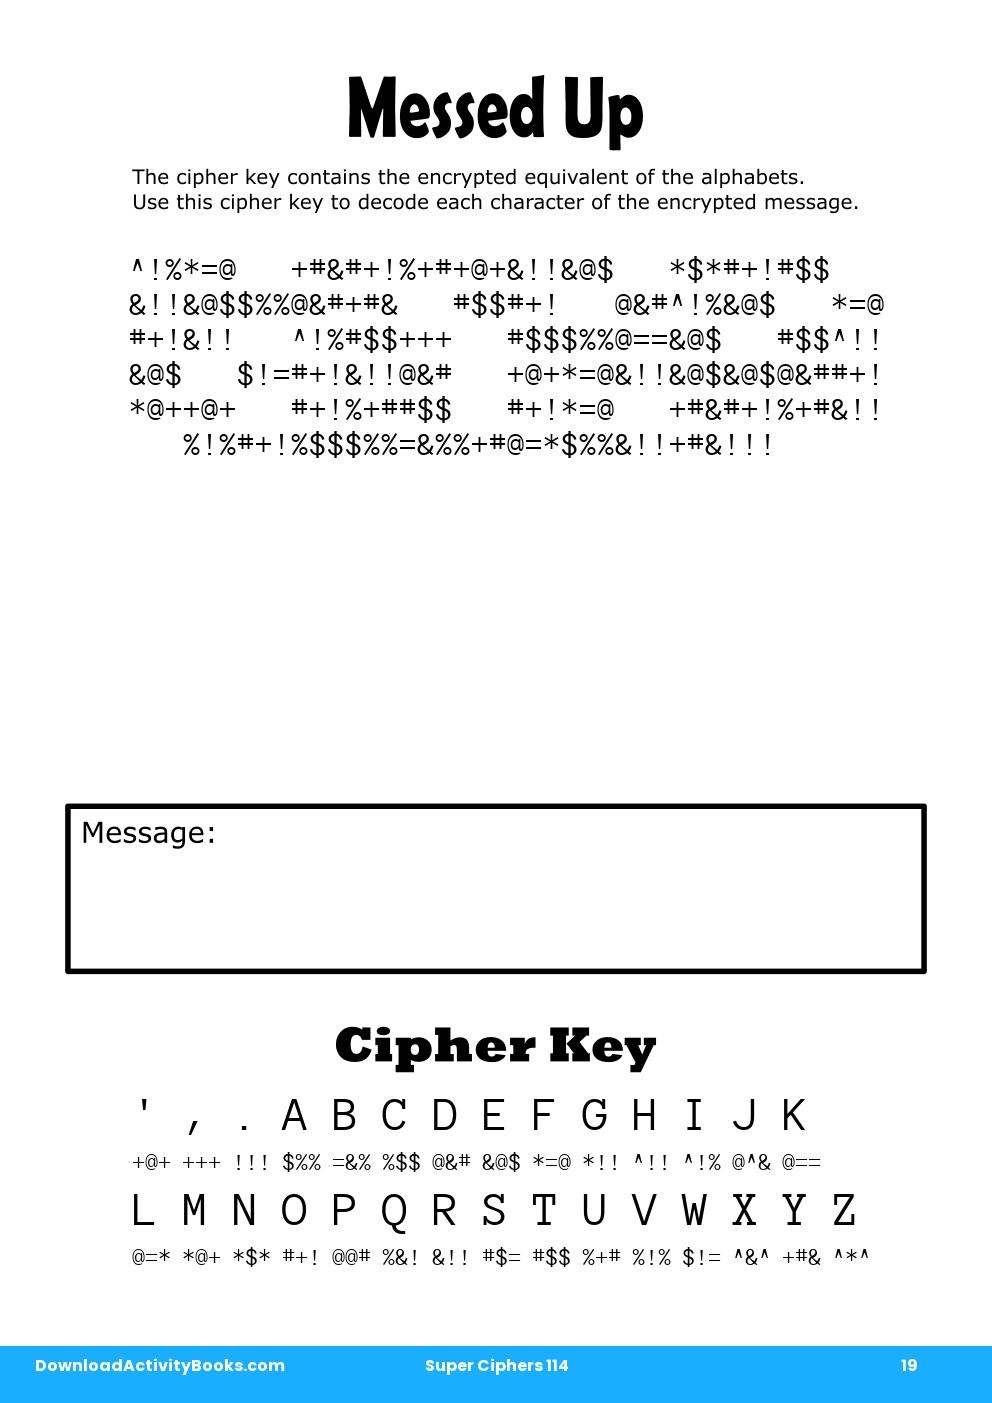 Messed Up in Super Ciphers 114